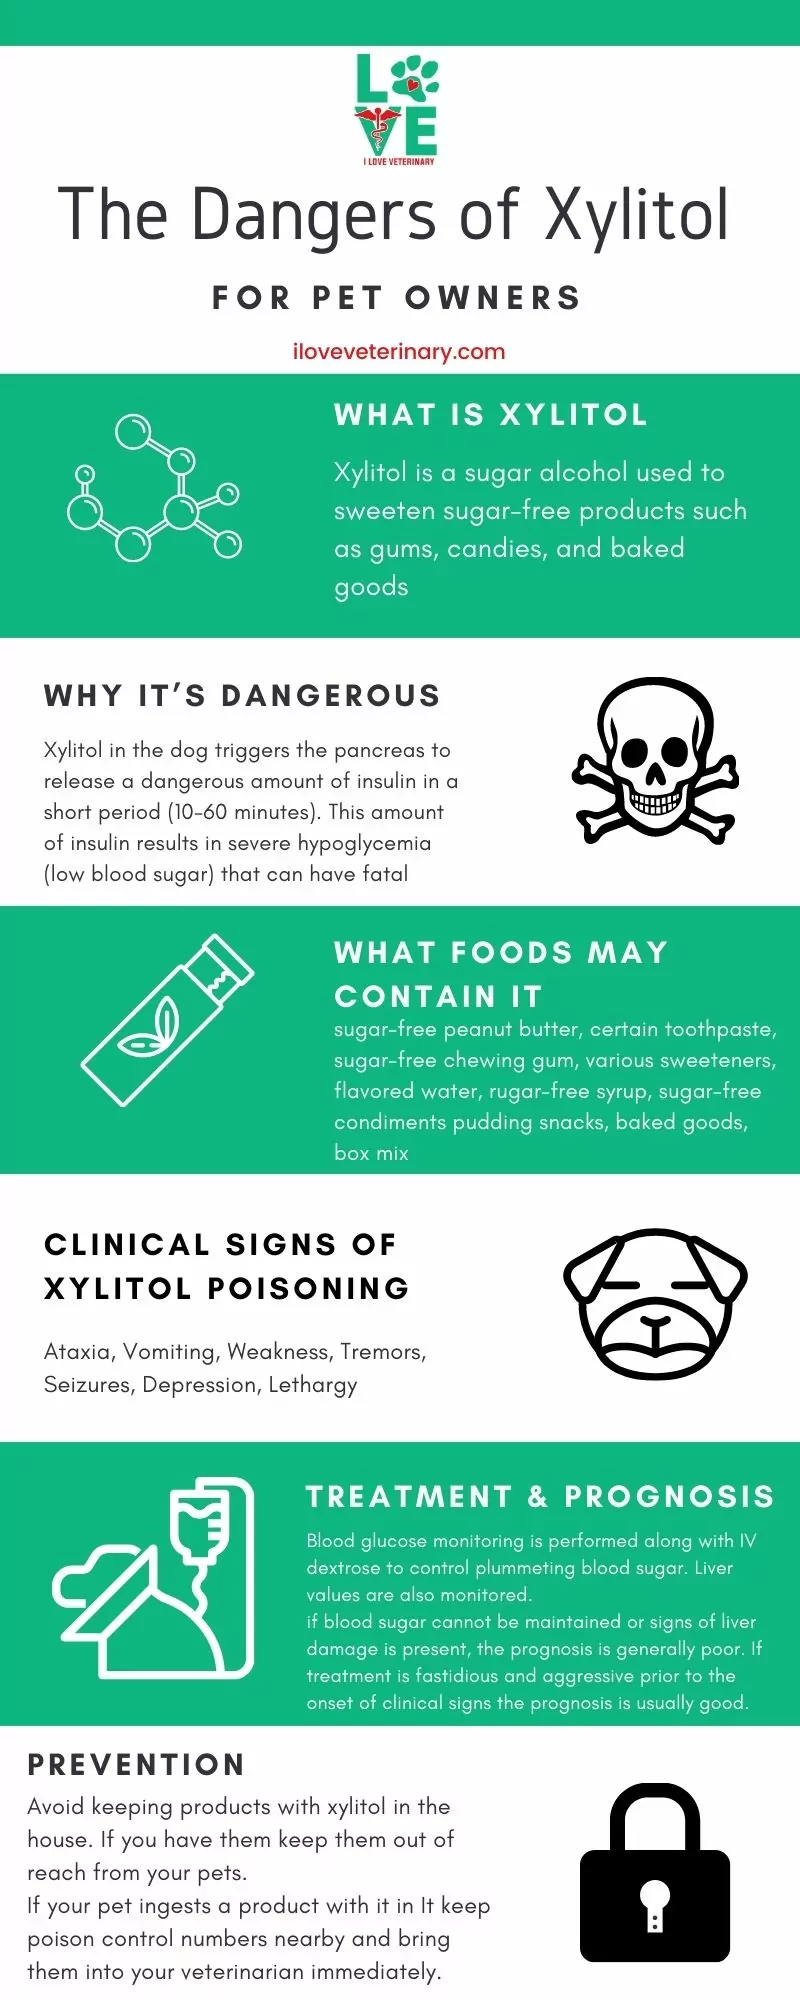 The Dangers of Xylitol toxicity in dogs